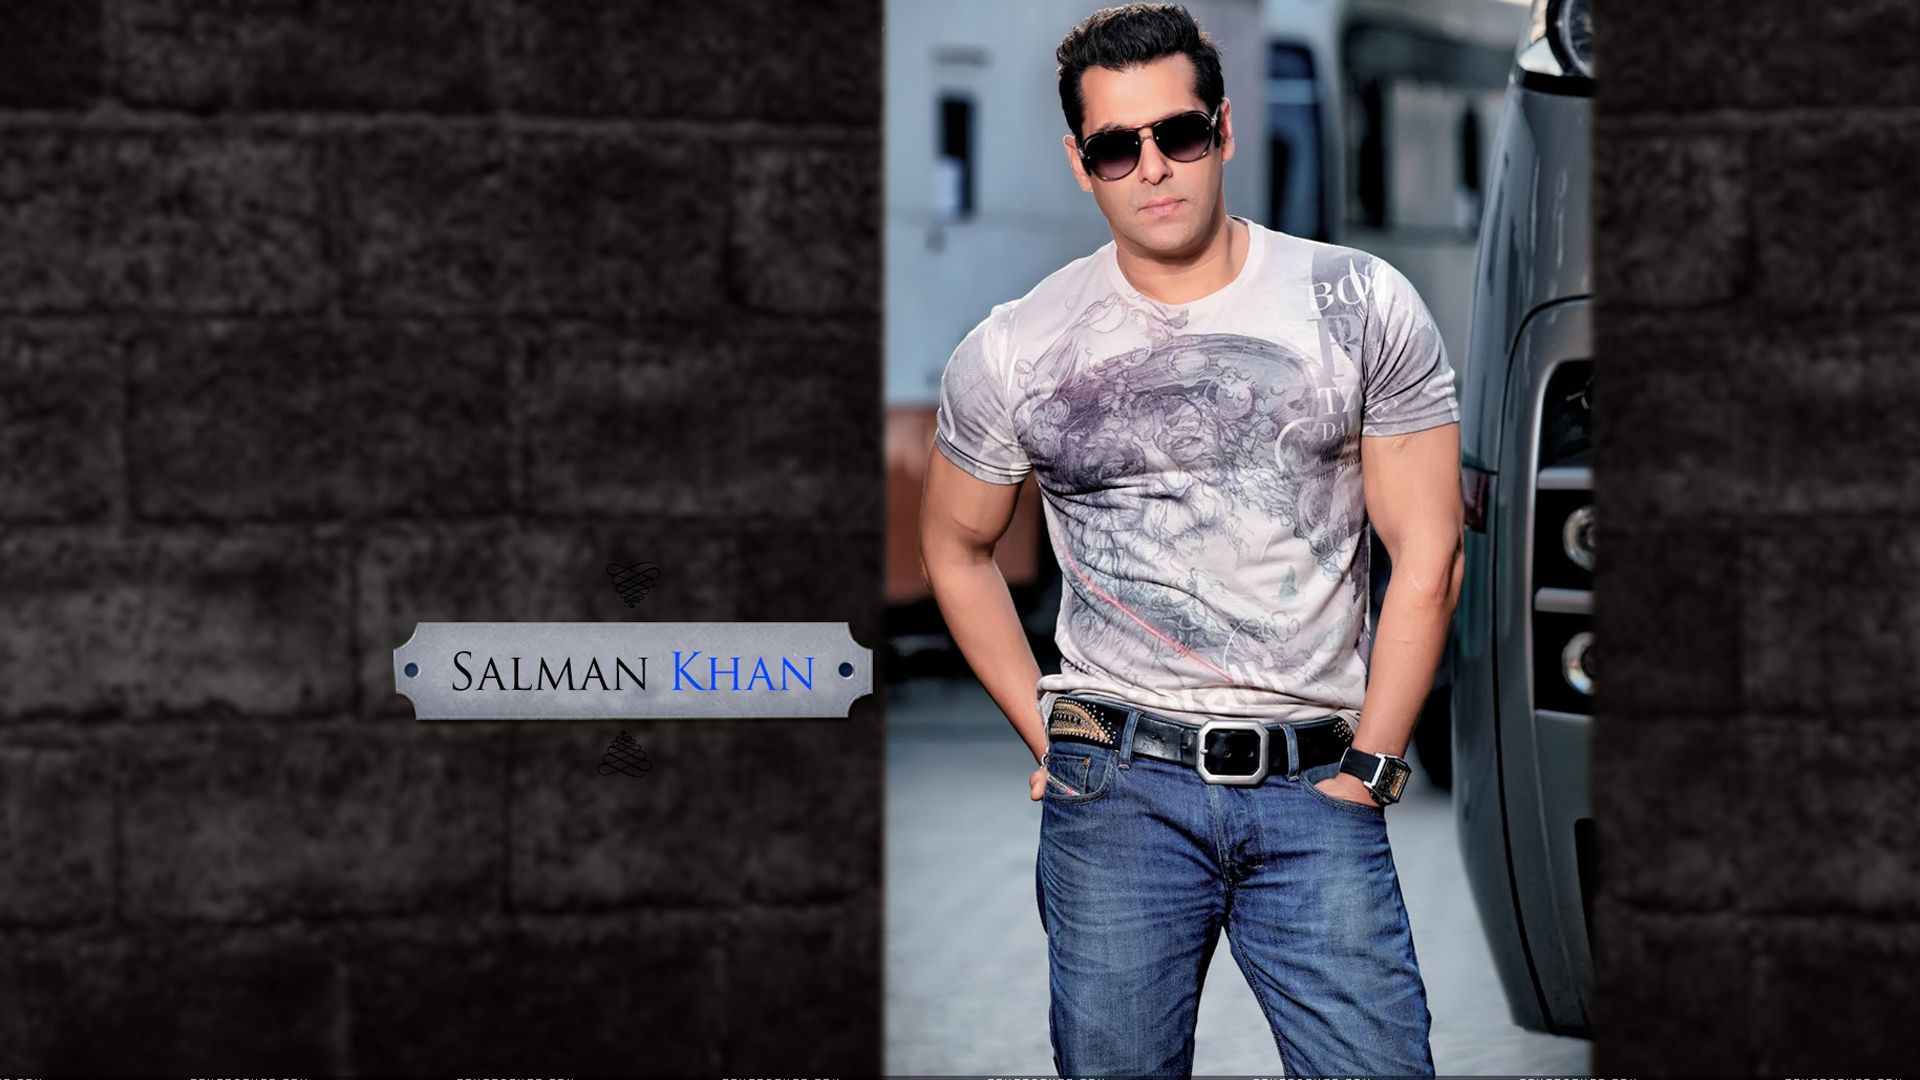 HD Image of Bollywood Actor Salman Khan PC Backgrounds